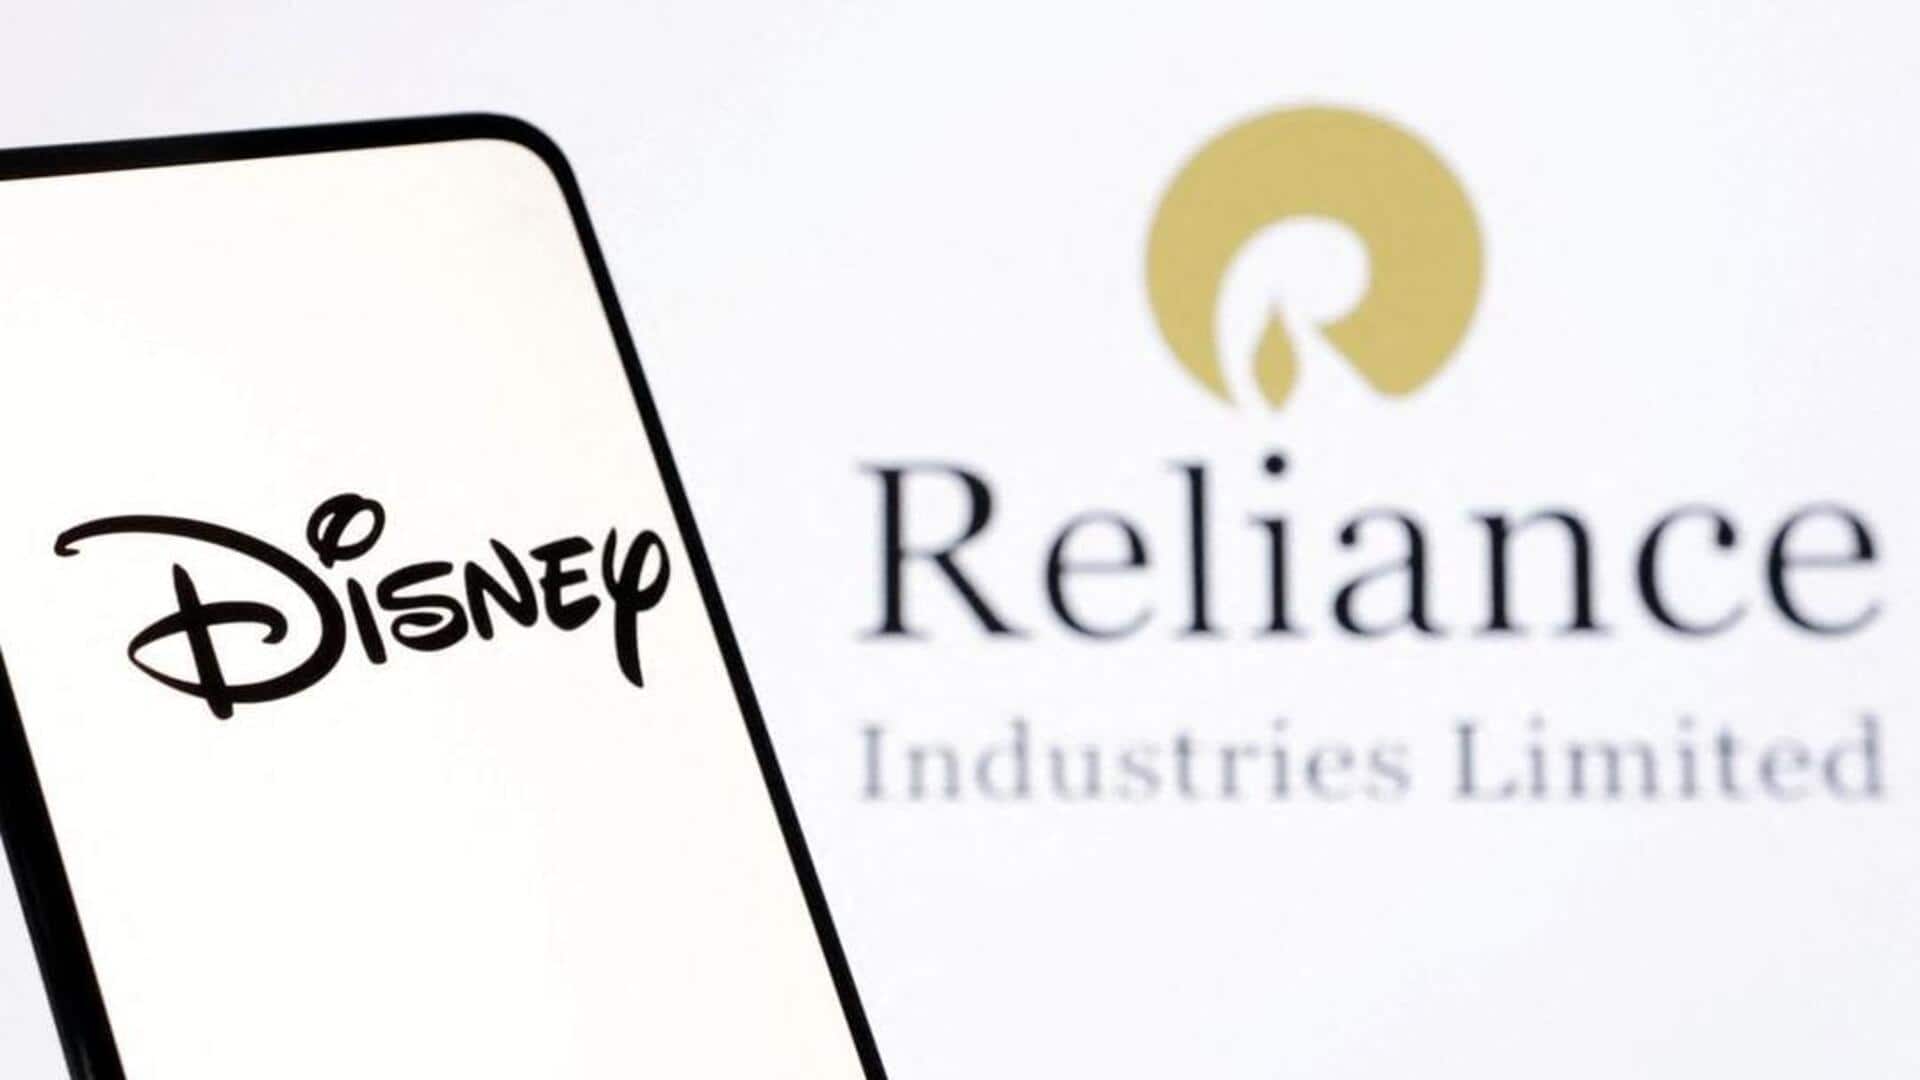 Disney-Reliance merger to be finalized by February 